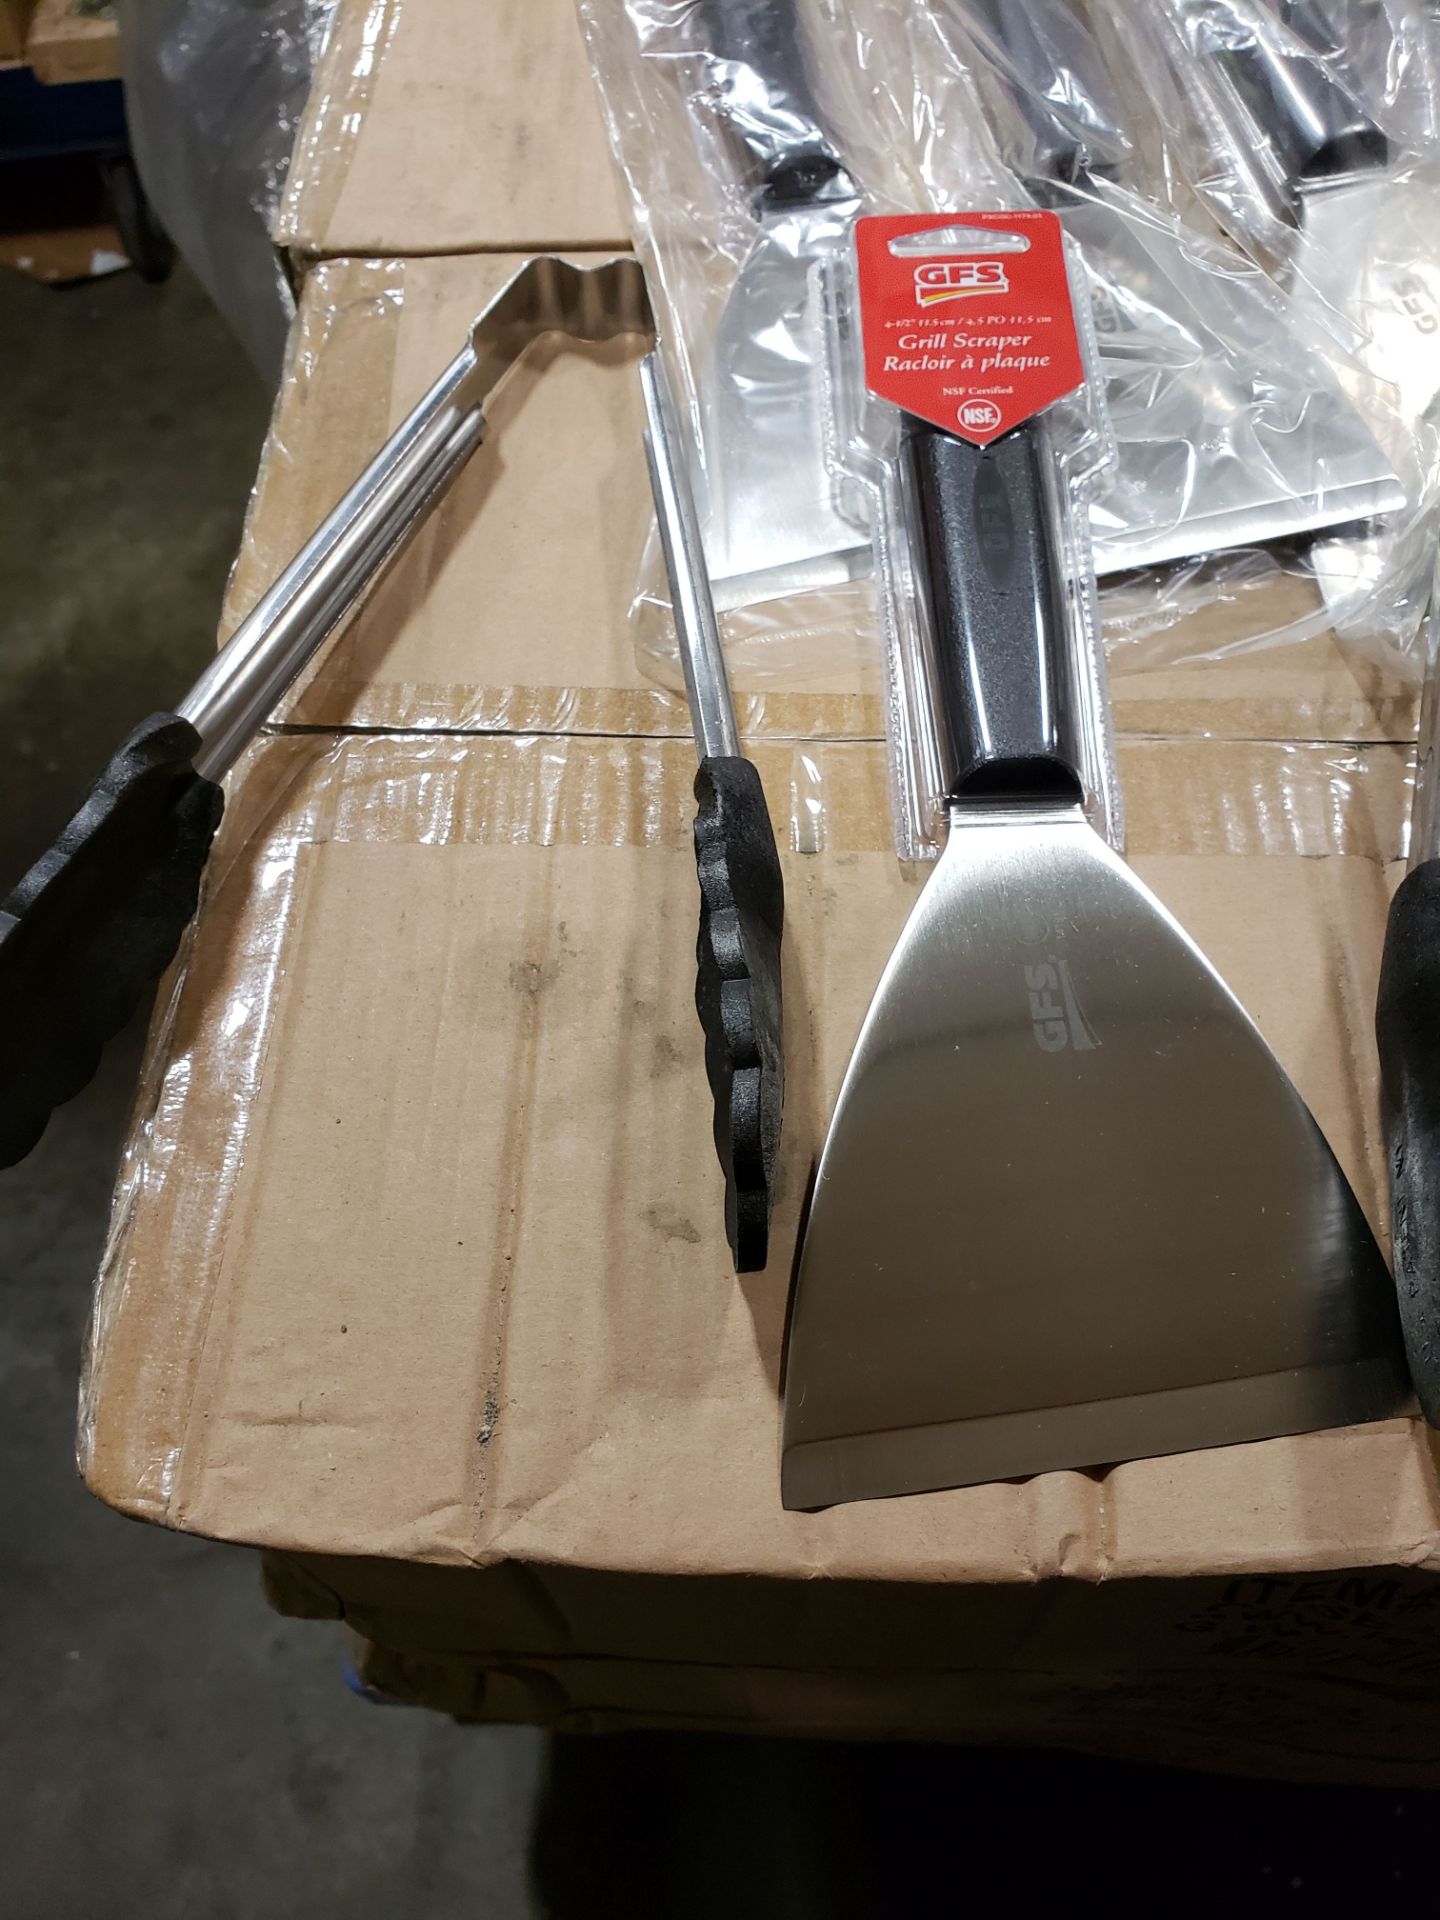 GFS Grill Scrapers & Serving Tongs - (10 Pieces Total)